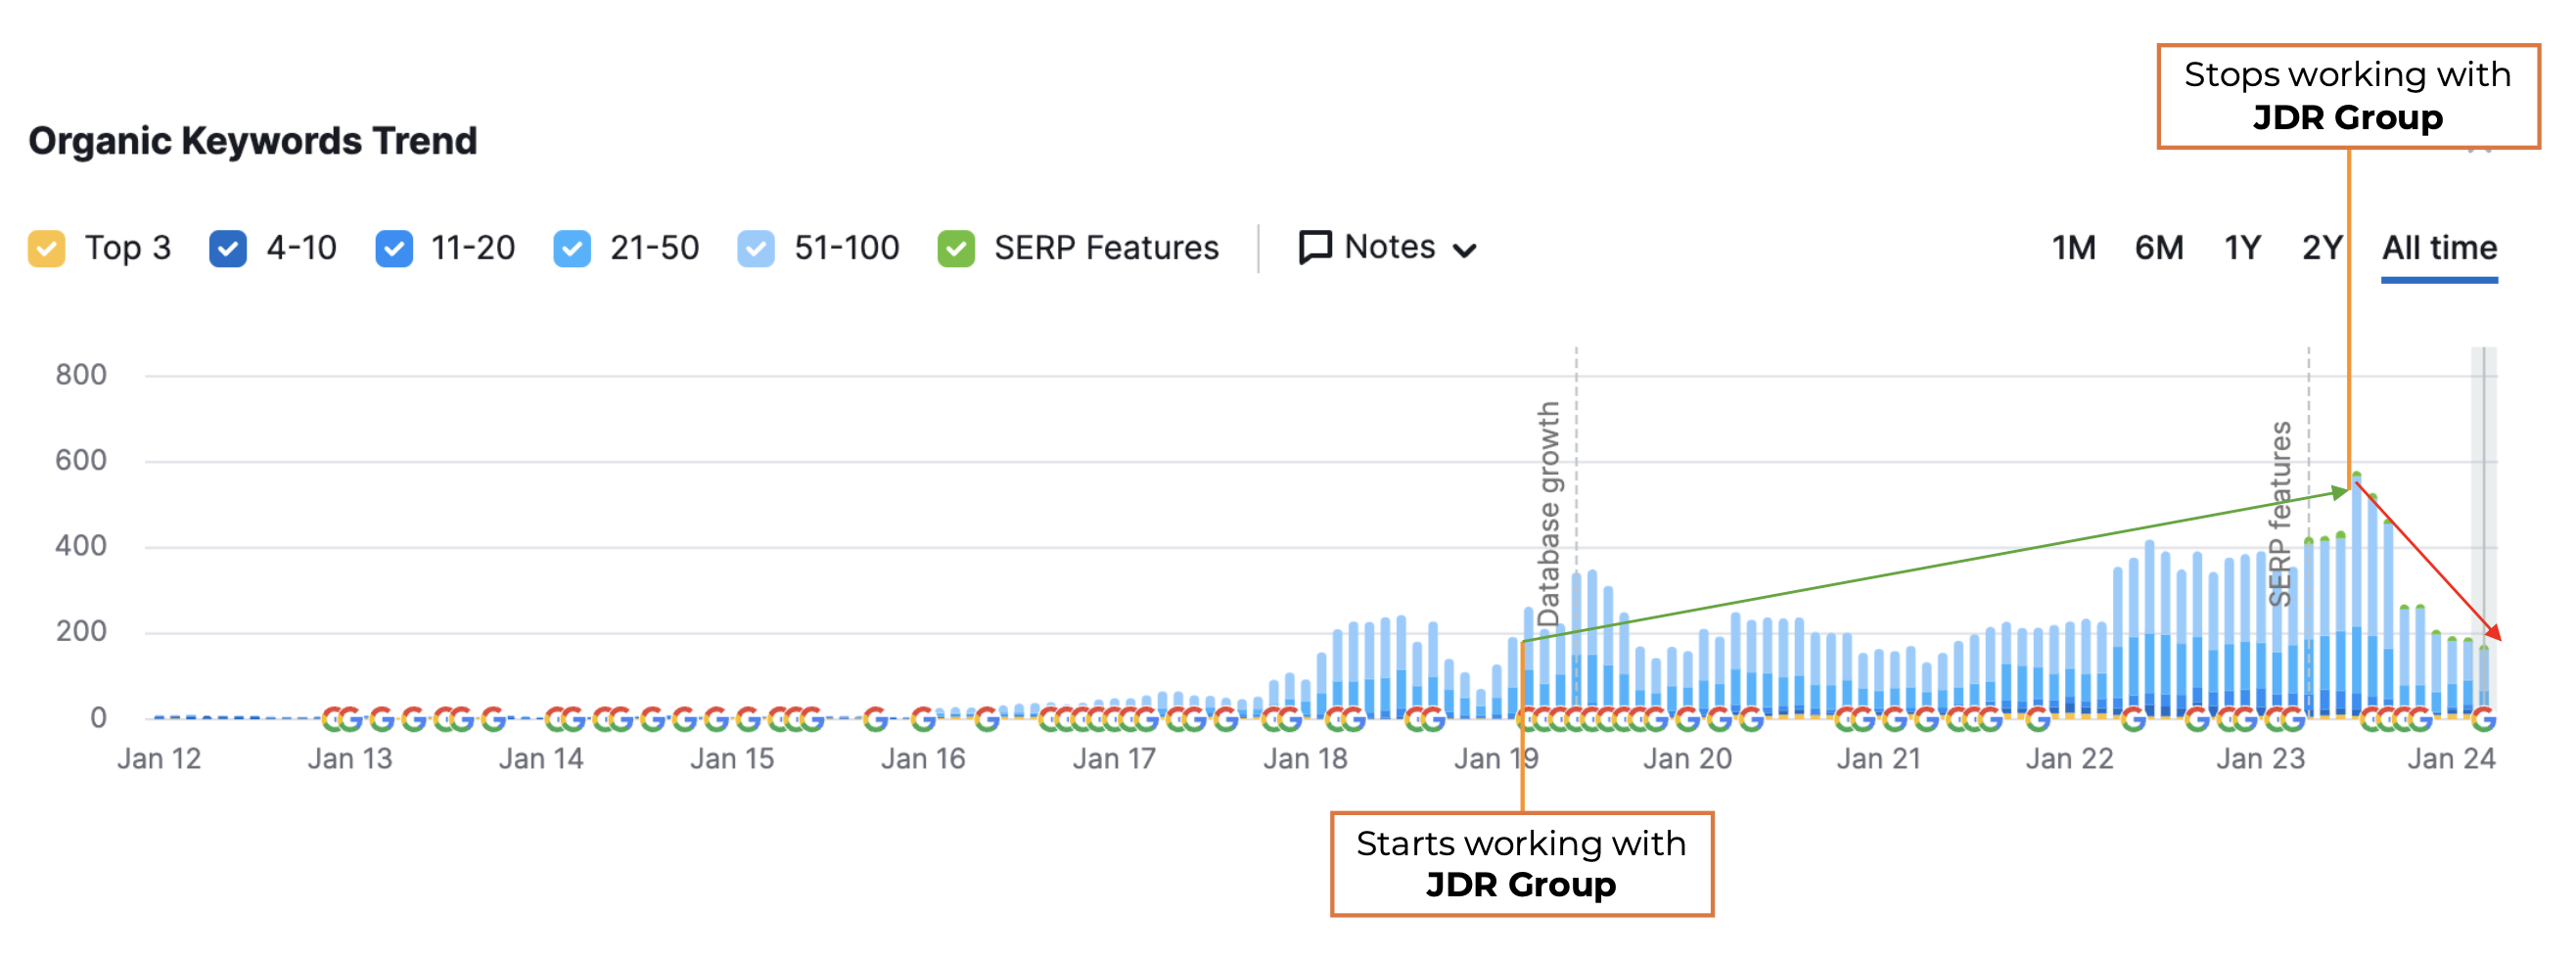 JDR Group Case Study - before and after stopping inbound marketing - 6